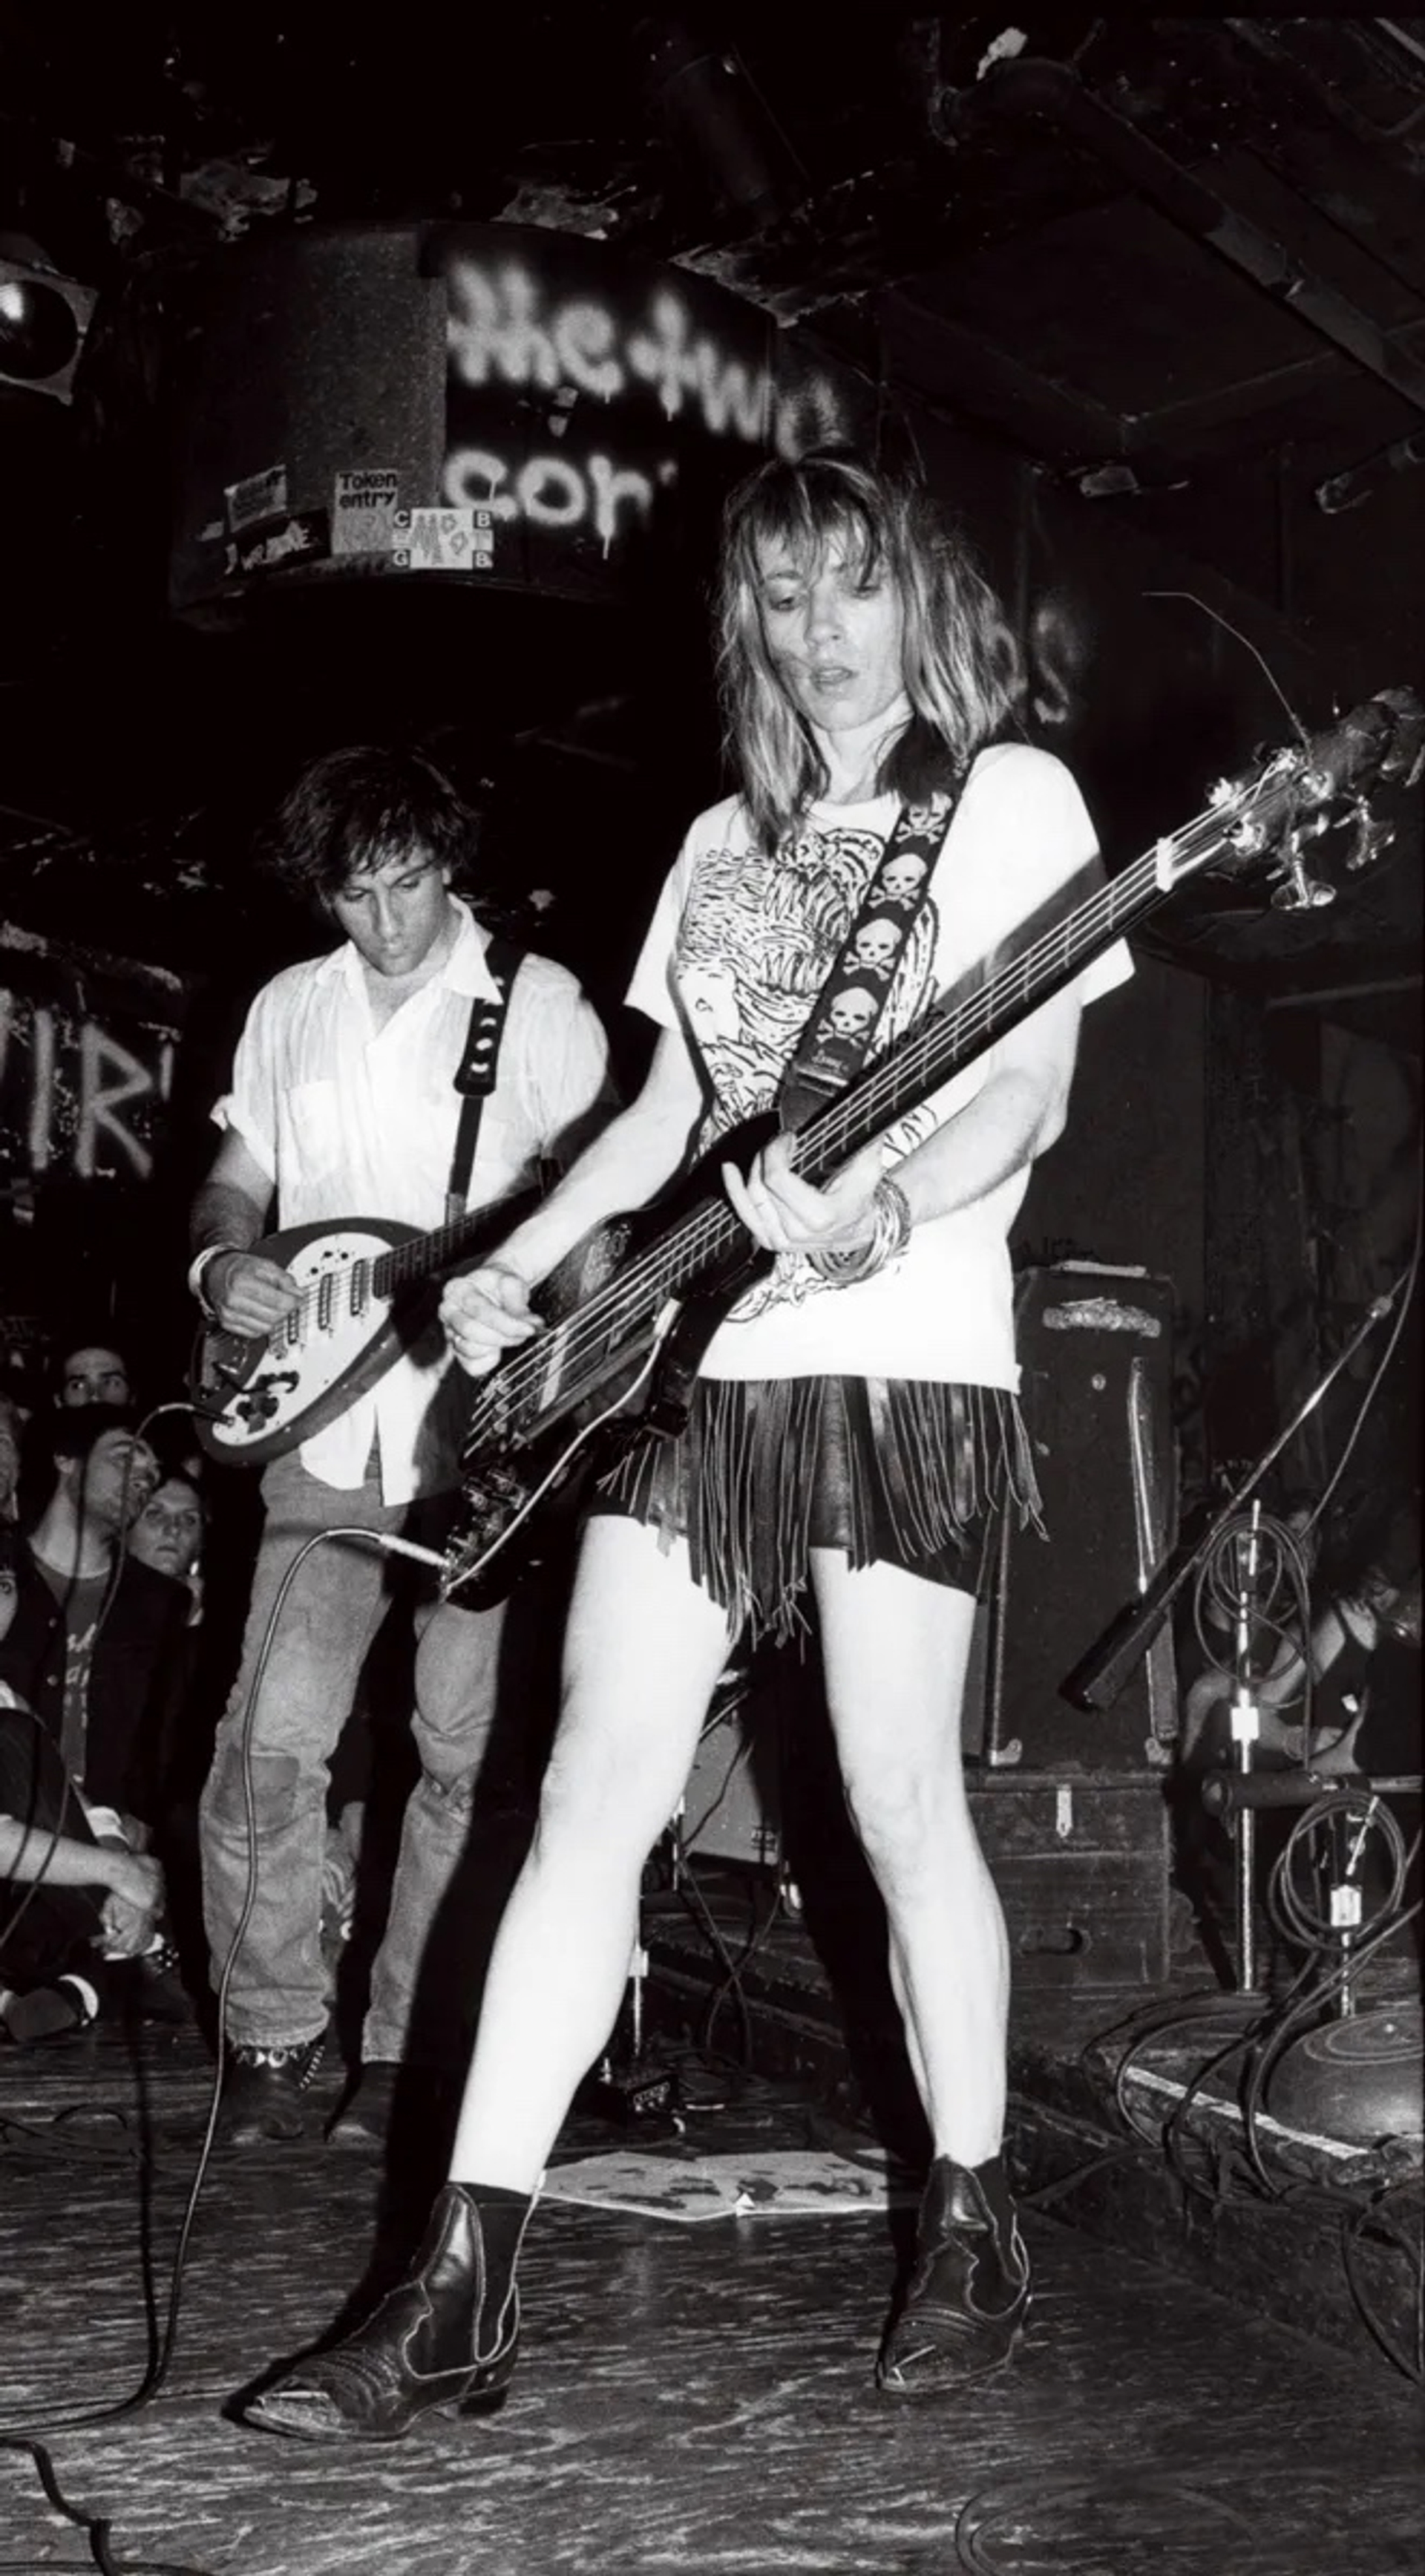 Kim Gordon and Lee Ronaldo on stage at CBGB, shot by Ebet Roberts, 1986.